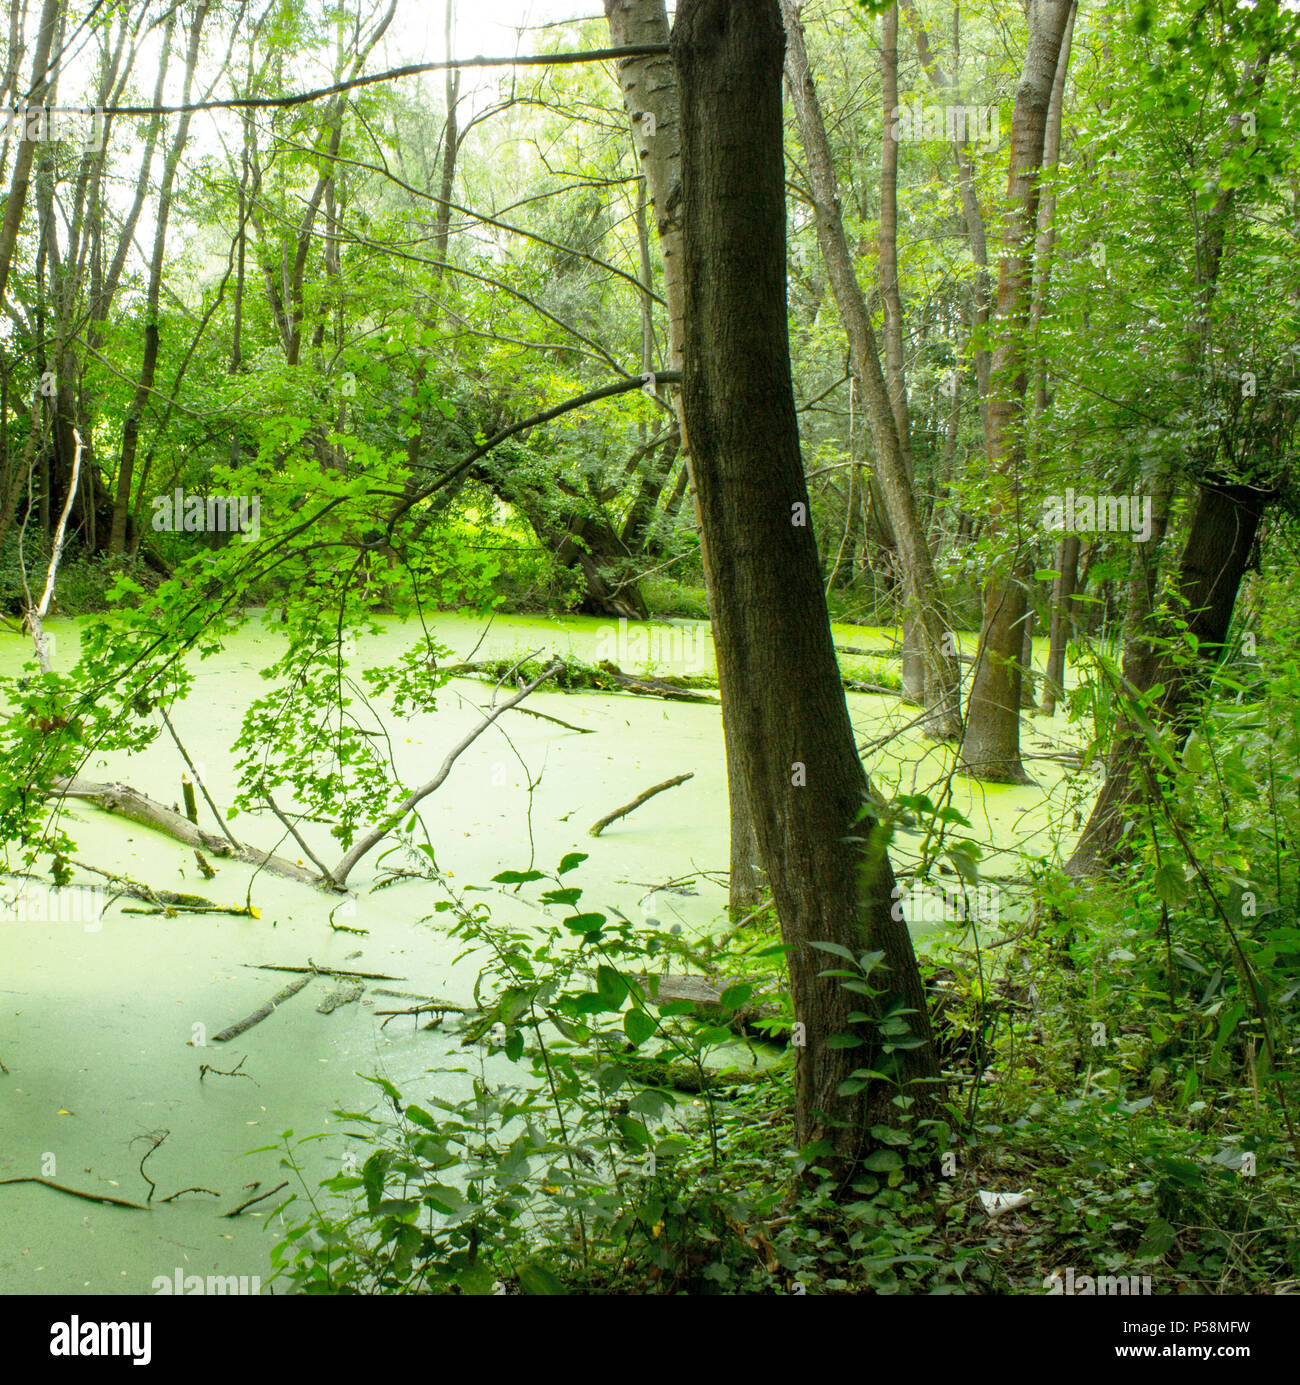 Bottomland forest. Trees and shrubs grow in the watery landscape. Stock Photo